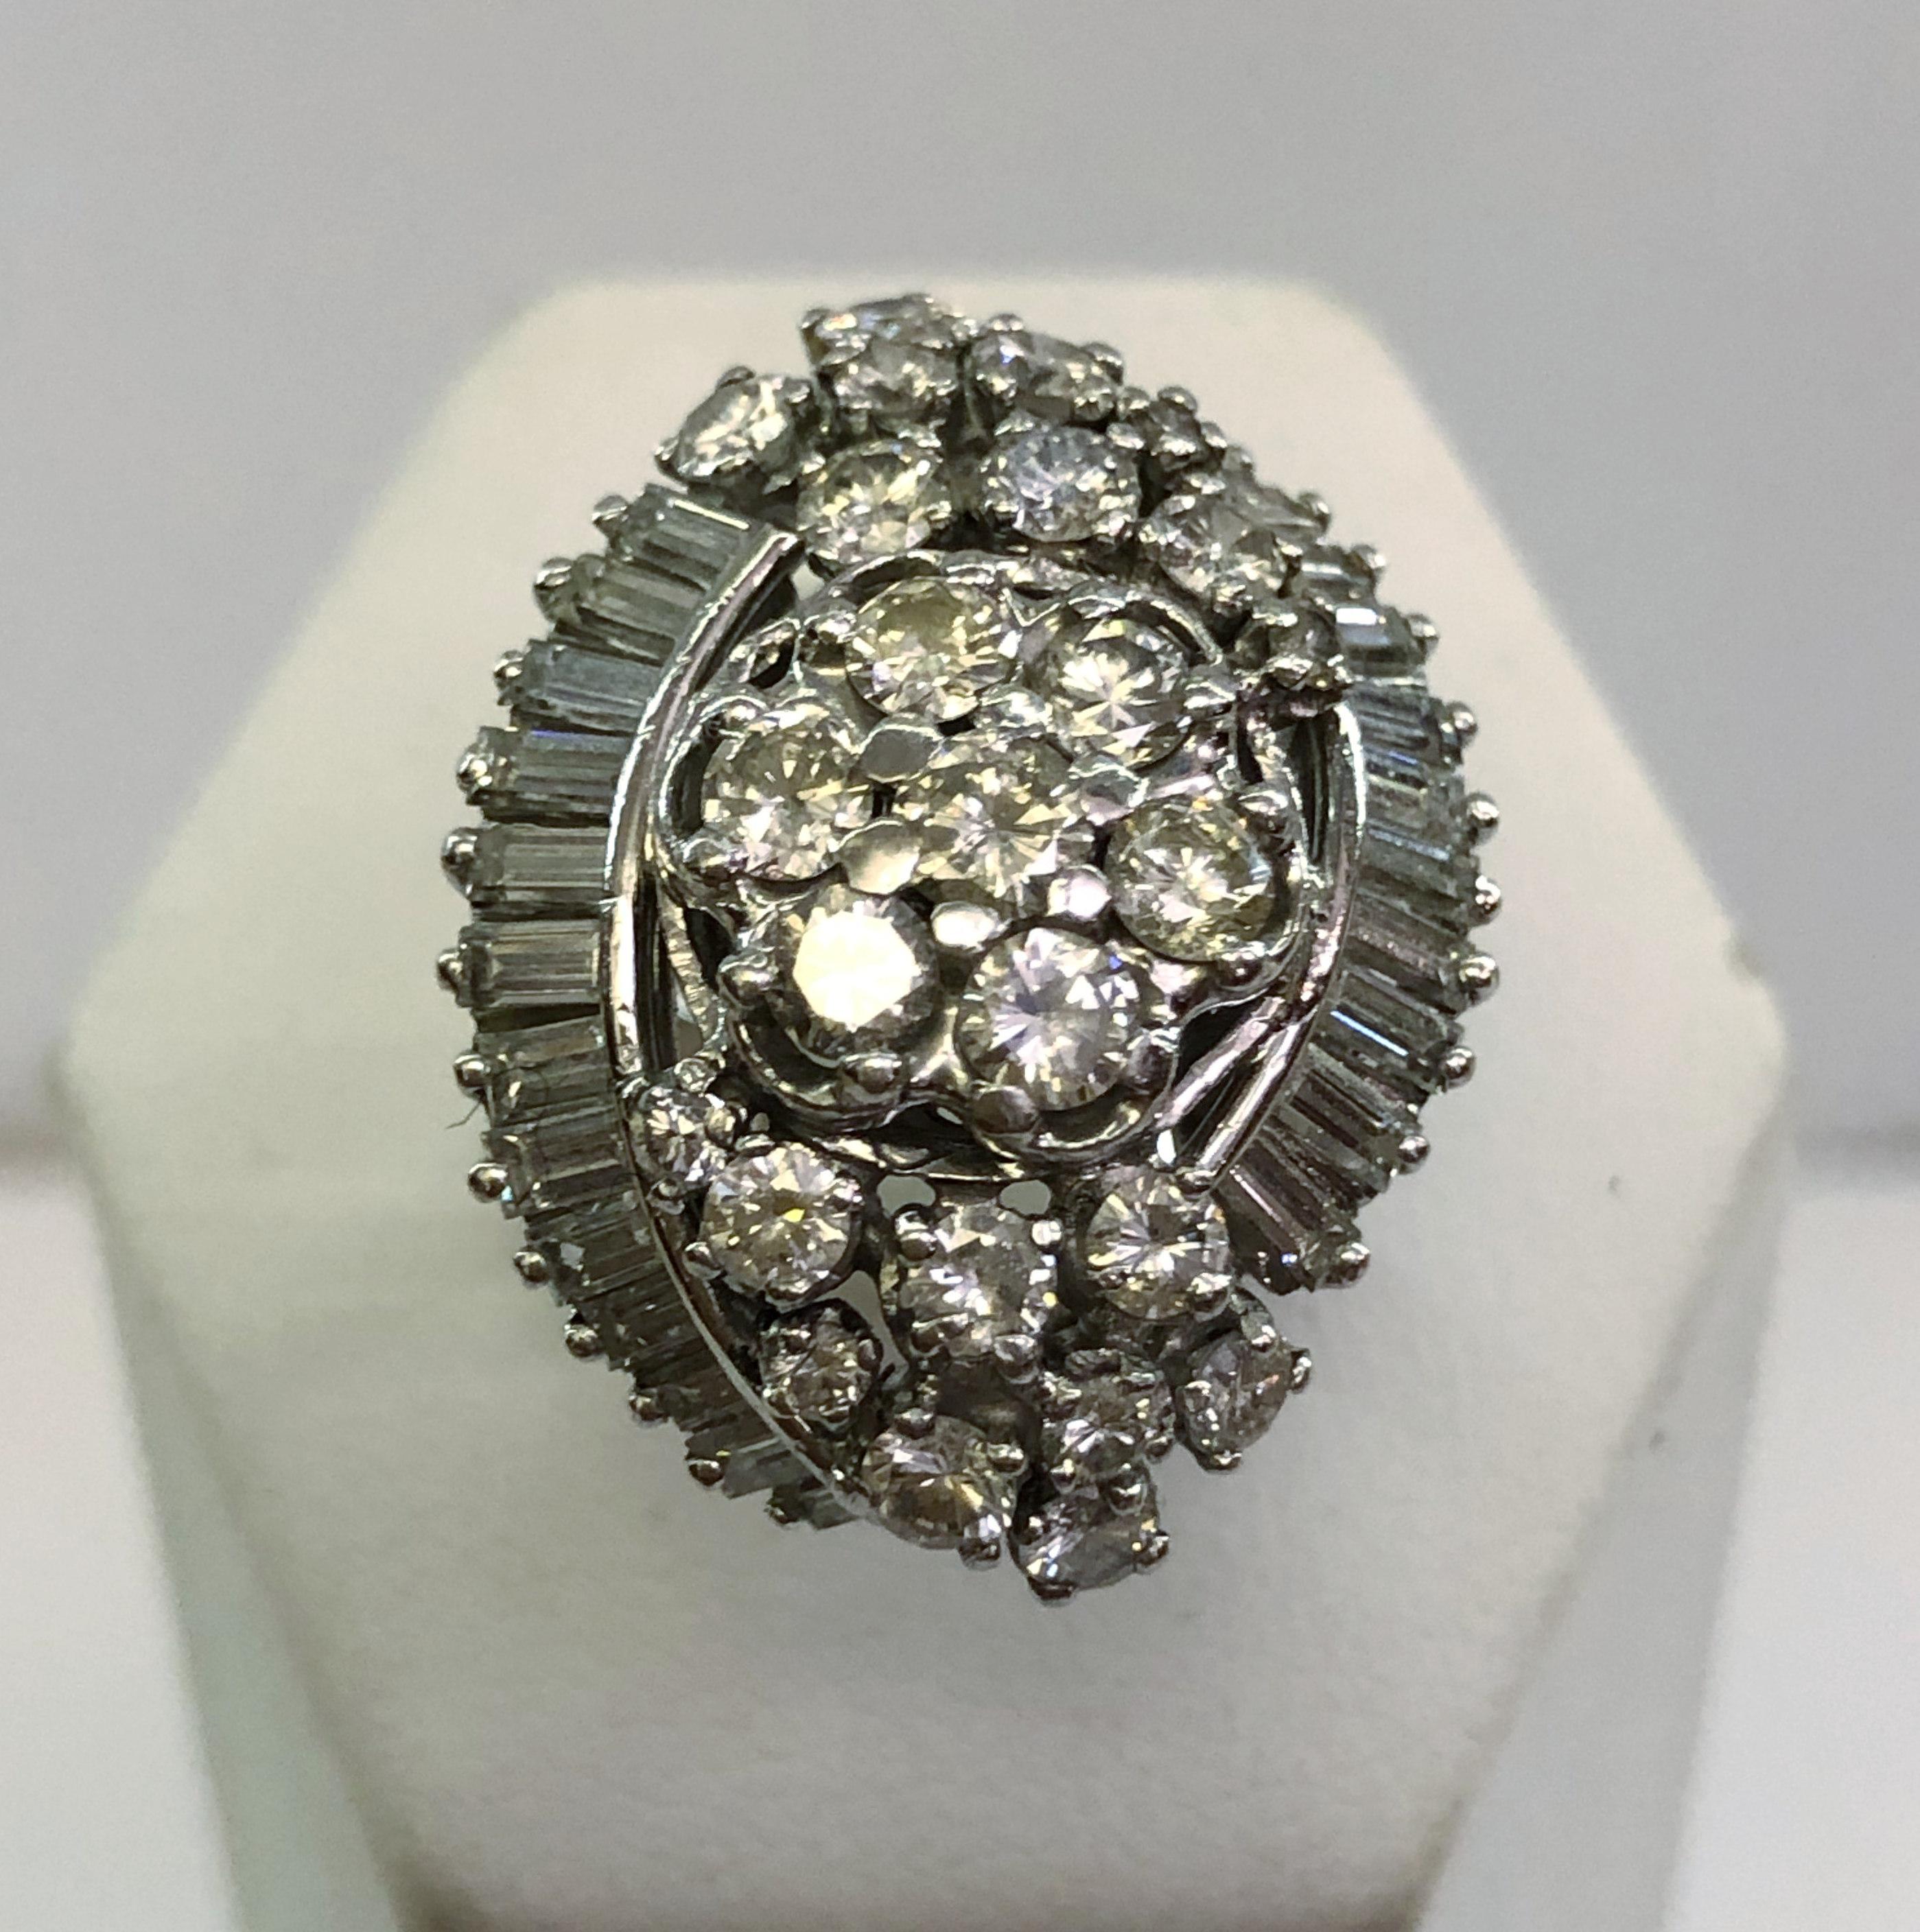 18 karat white gold ring with round and baguette diamonds for a total of 3.30 carats / Made in Italy 1970s
Ring size US 7.25